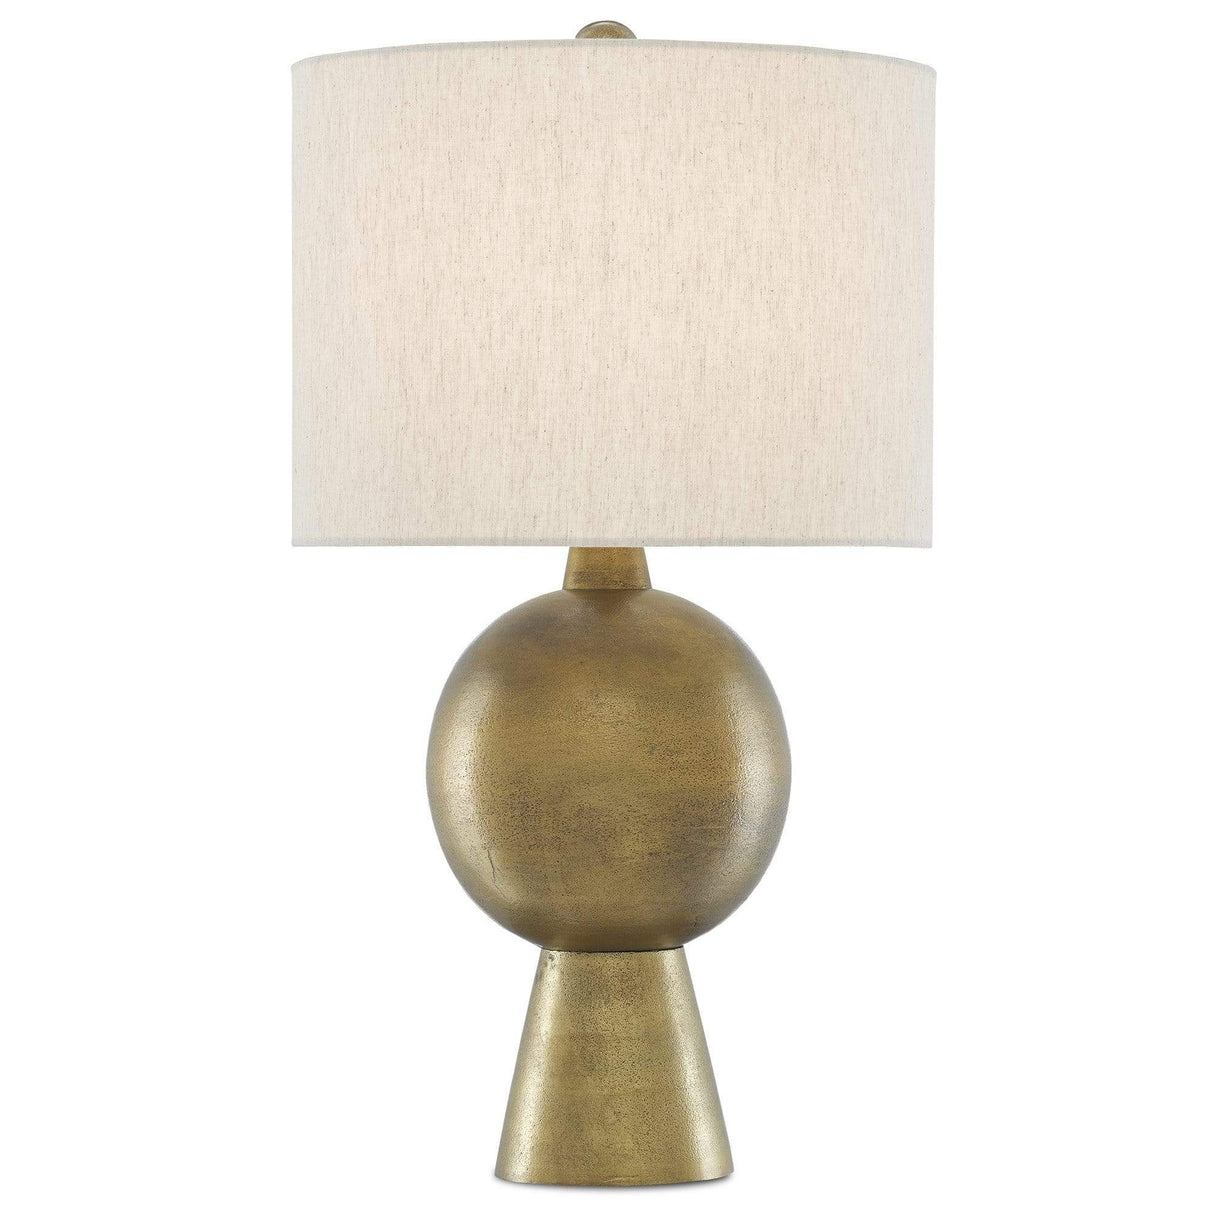 Currey and Company Rami Table Lamp - Brass Lighting currey-co-6000-0535